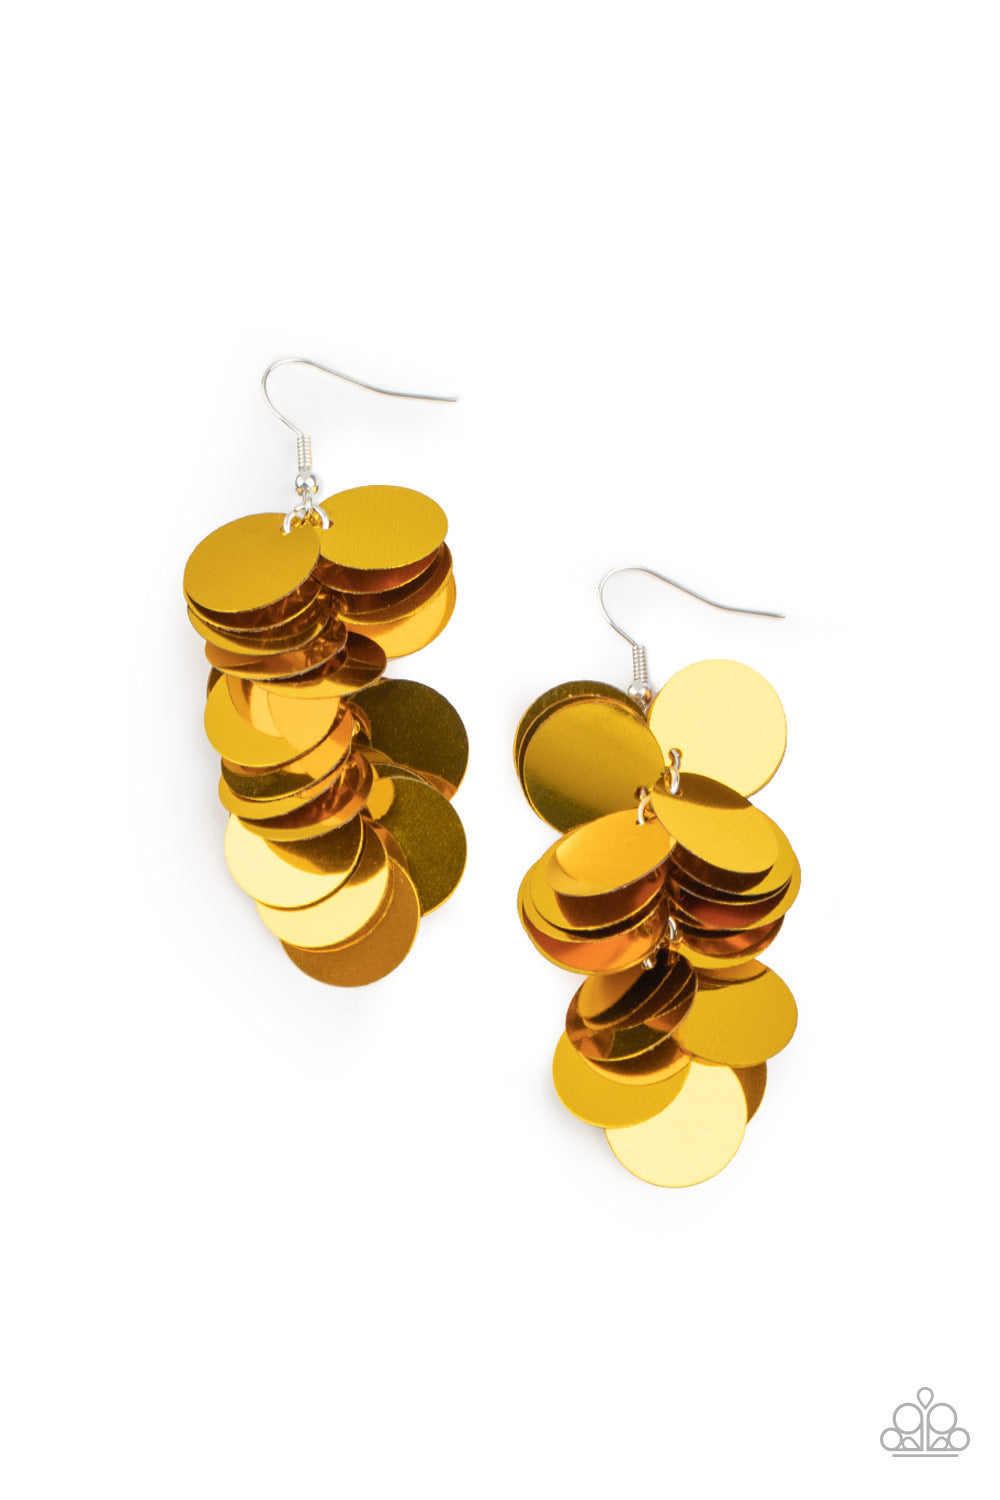 &lt;P&gt;A cluster of bubbly gold sequins dangle from the ear, creating effortless effervescence. Earring attaches to a standard fishhook fitting.&lt;/P&gt;  

&lt;P&gt; &lt;I&gt;  Sold as one pair of earrings. &lt;/I&gt;  &lt;/P&gt;


&lt;img src=\&quot;https://d9b54x484lq62.cloudfront.net/paparazzi/shopping/images/517_tag150x115_1.png\&quot; alt=\&quot;New Kit\&quot; align=\&quot;middle\&quot; height=\&quot;50\&quot; width=\&quot;50\&quot;/&gt;